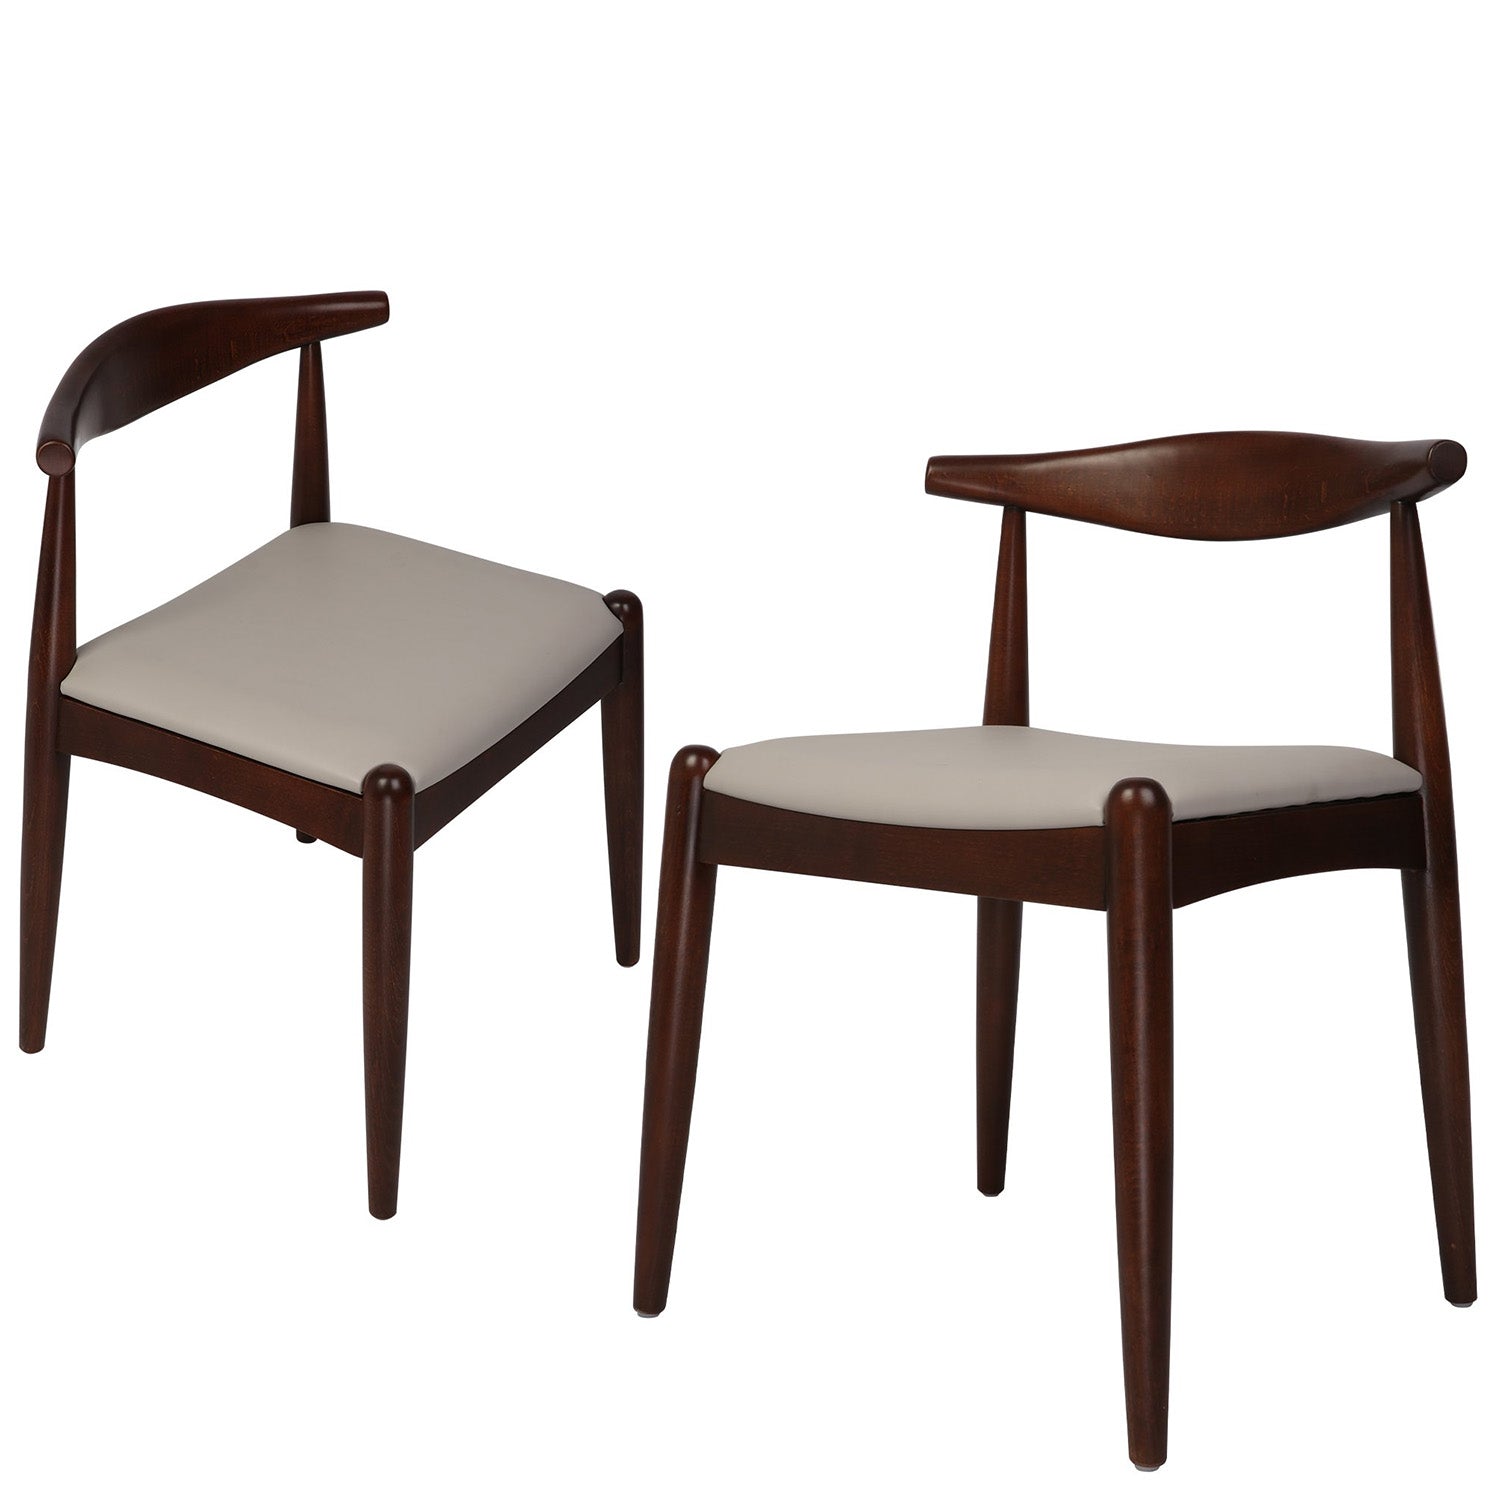 LUCKYERMORE Set of 2 Upholstered Solid Wood Side Chairs Modern Kitchen Chairs, Walnut